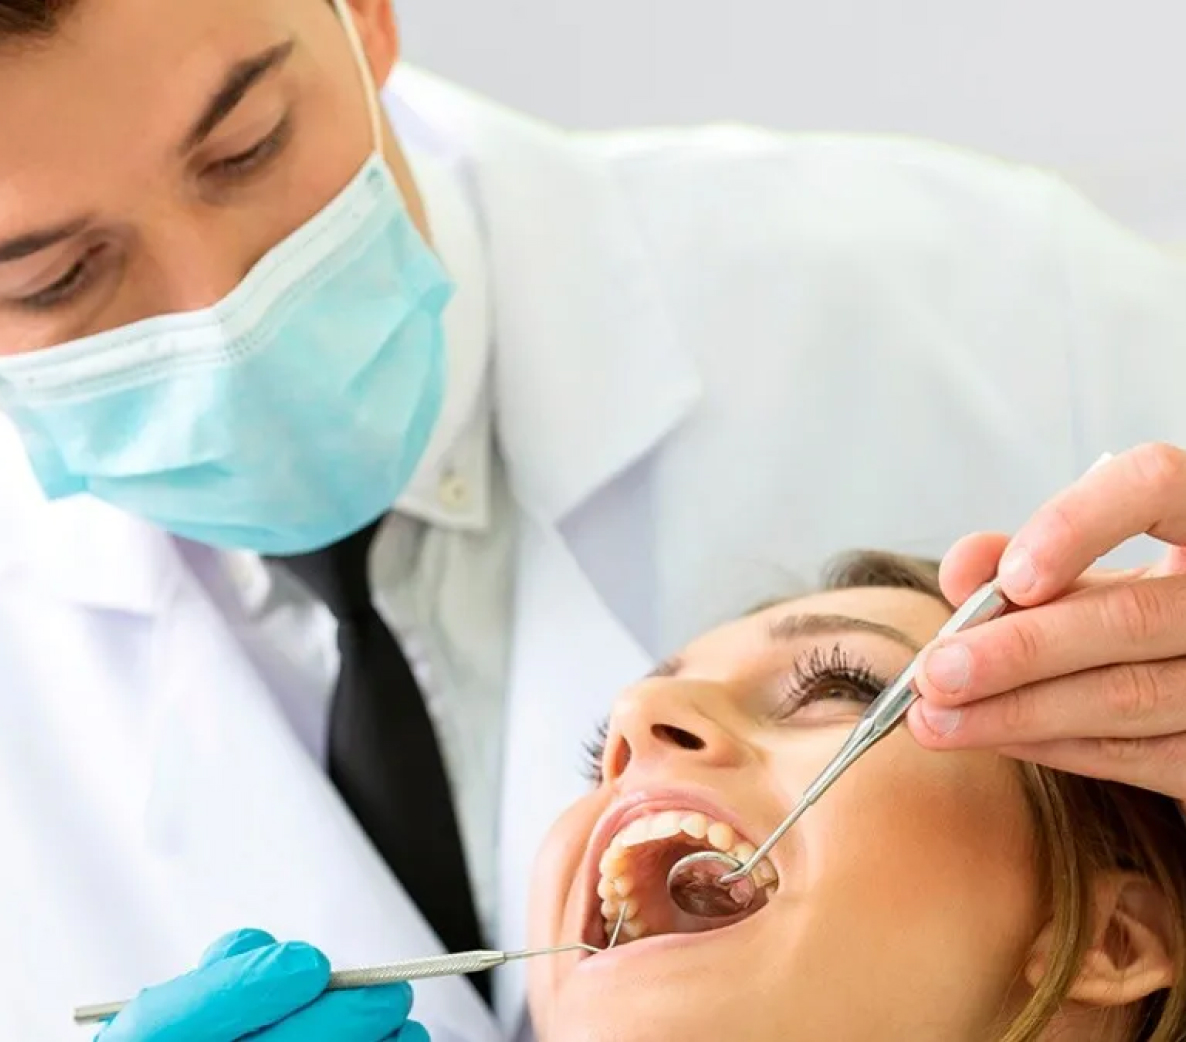 Dentist wearing a facemask working on a patient.